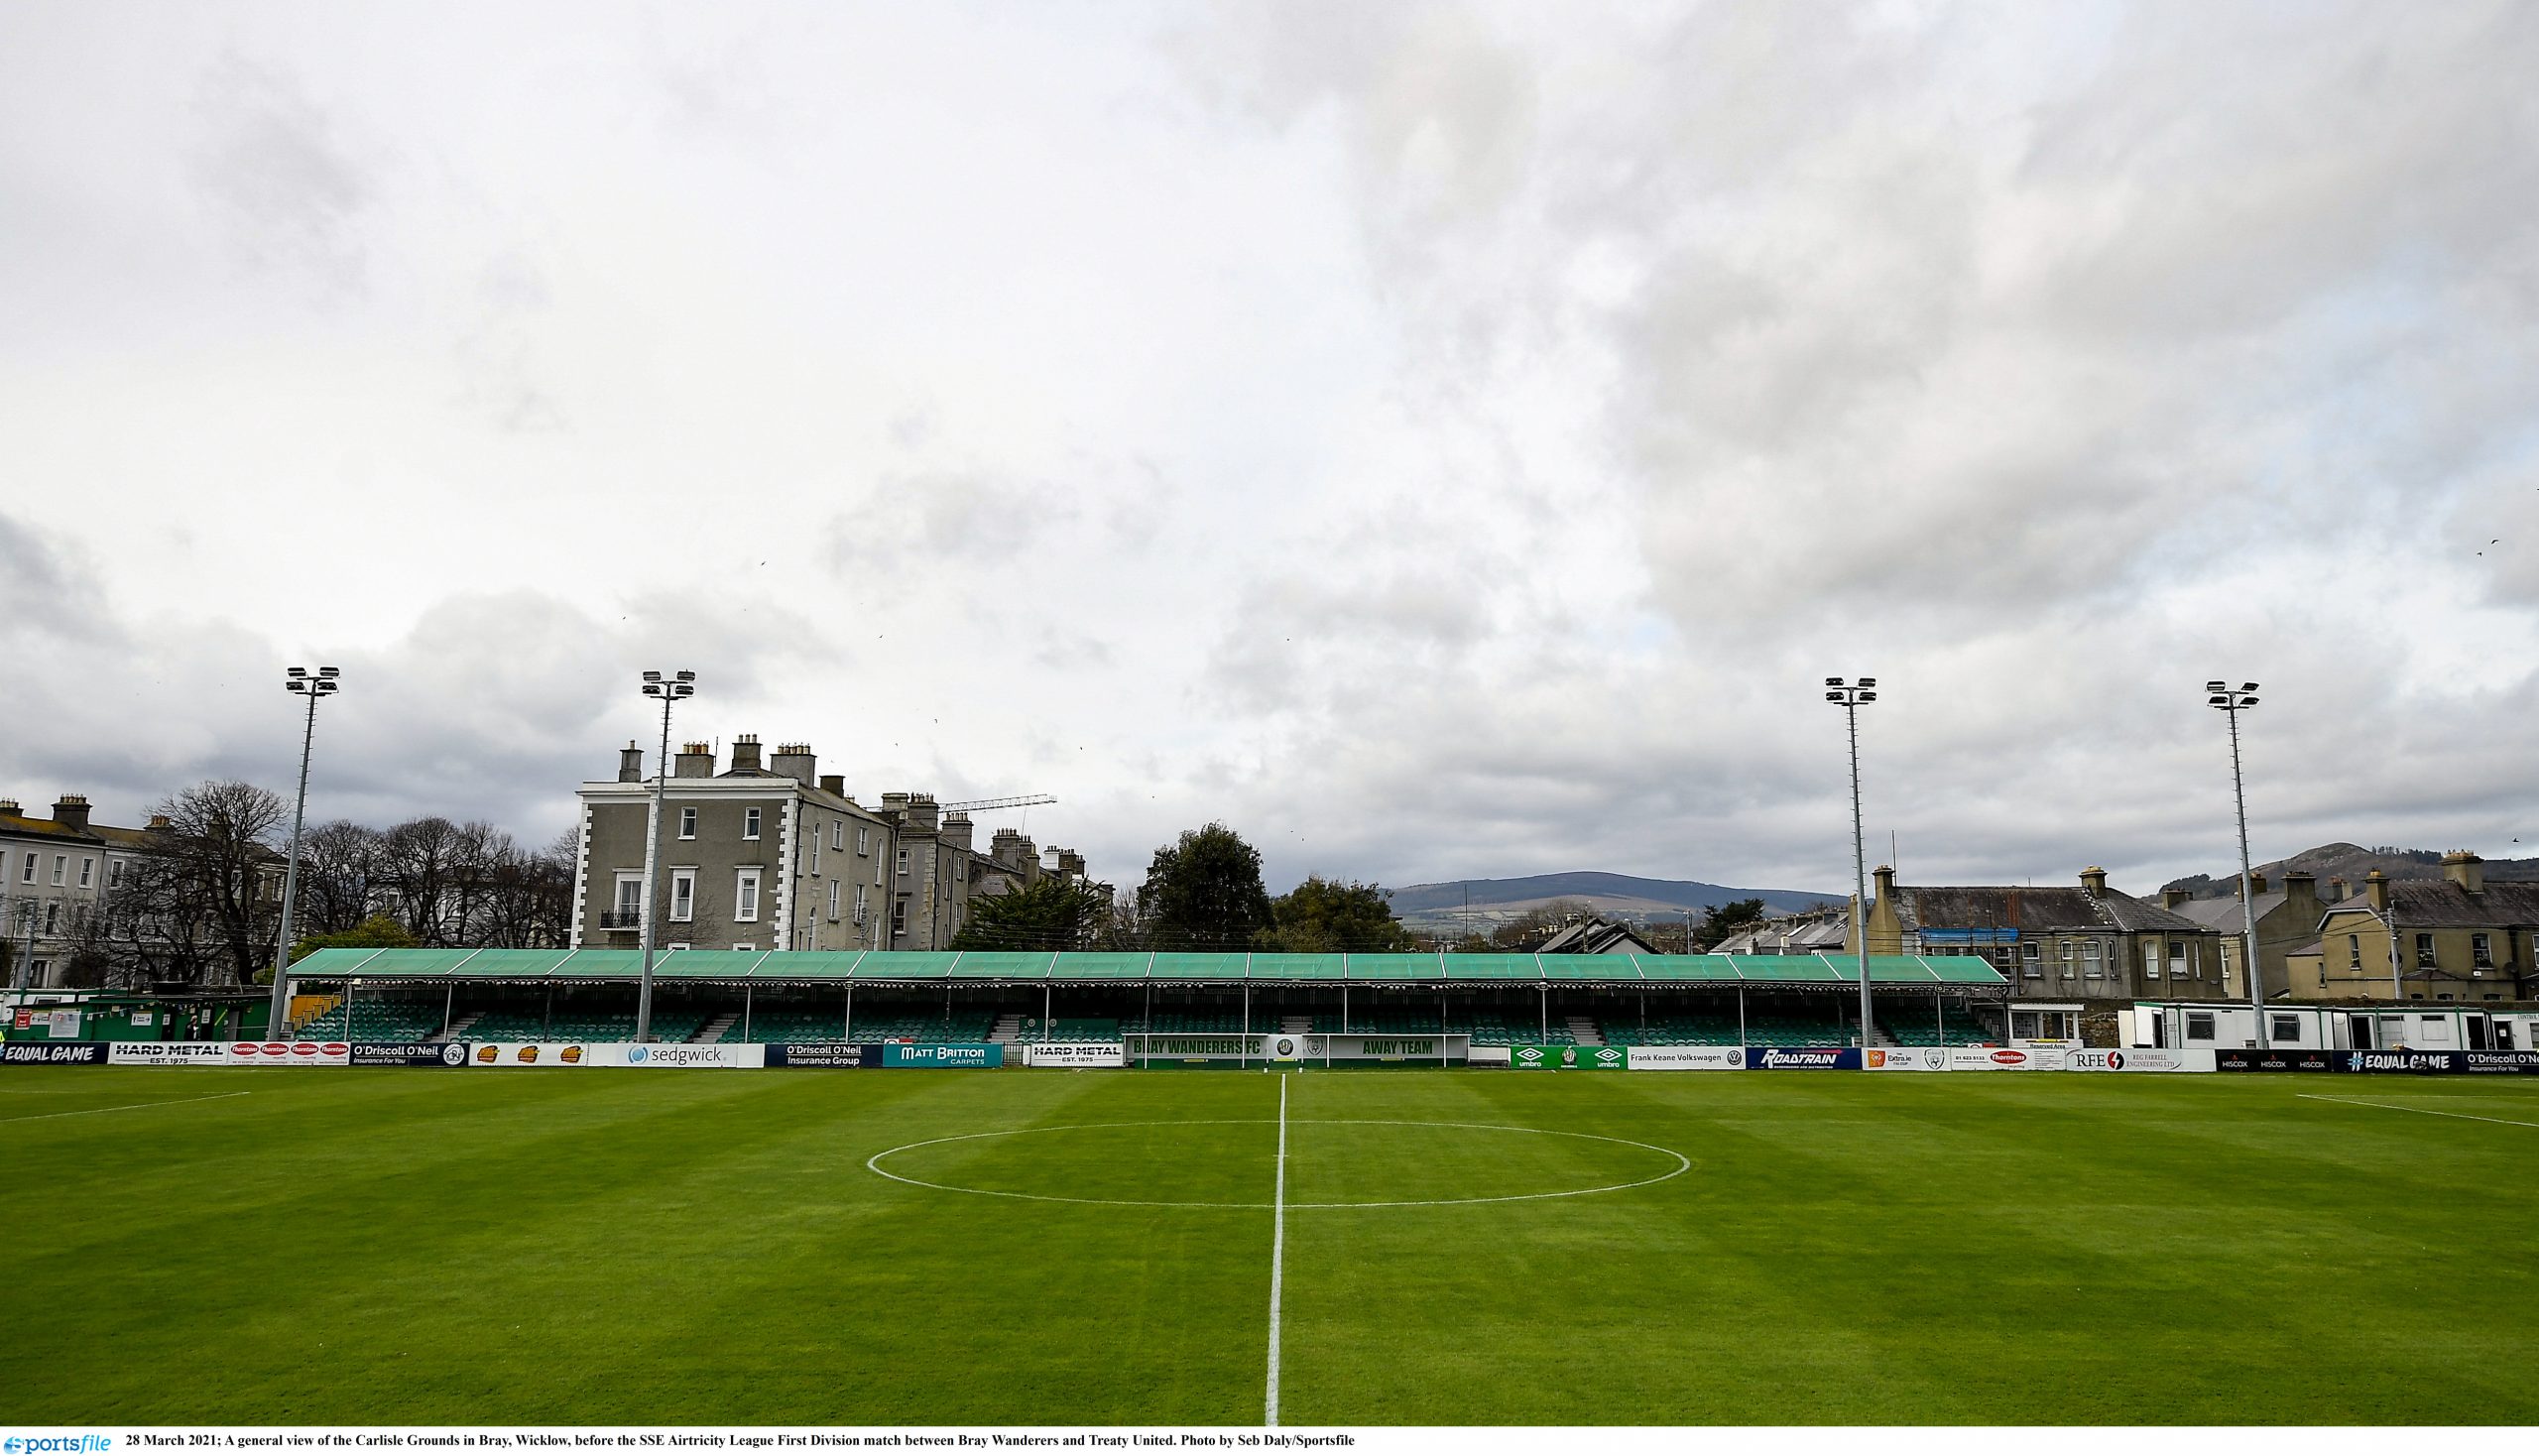 Shels FAI Cup fixture in Bray moved to Friday, July 29